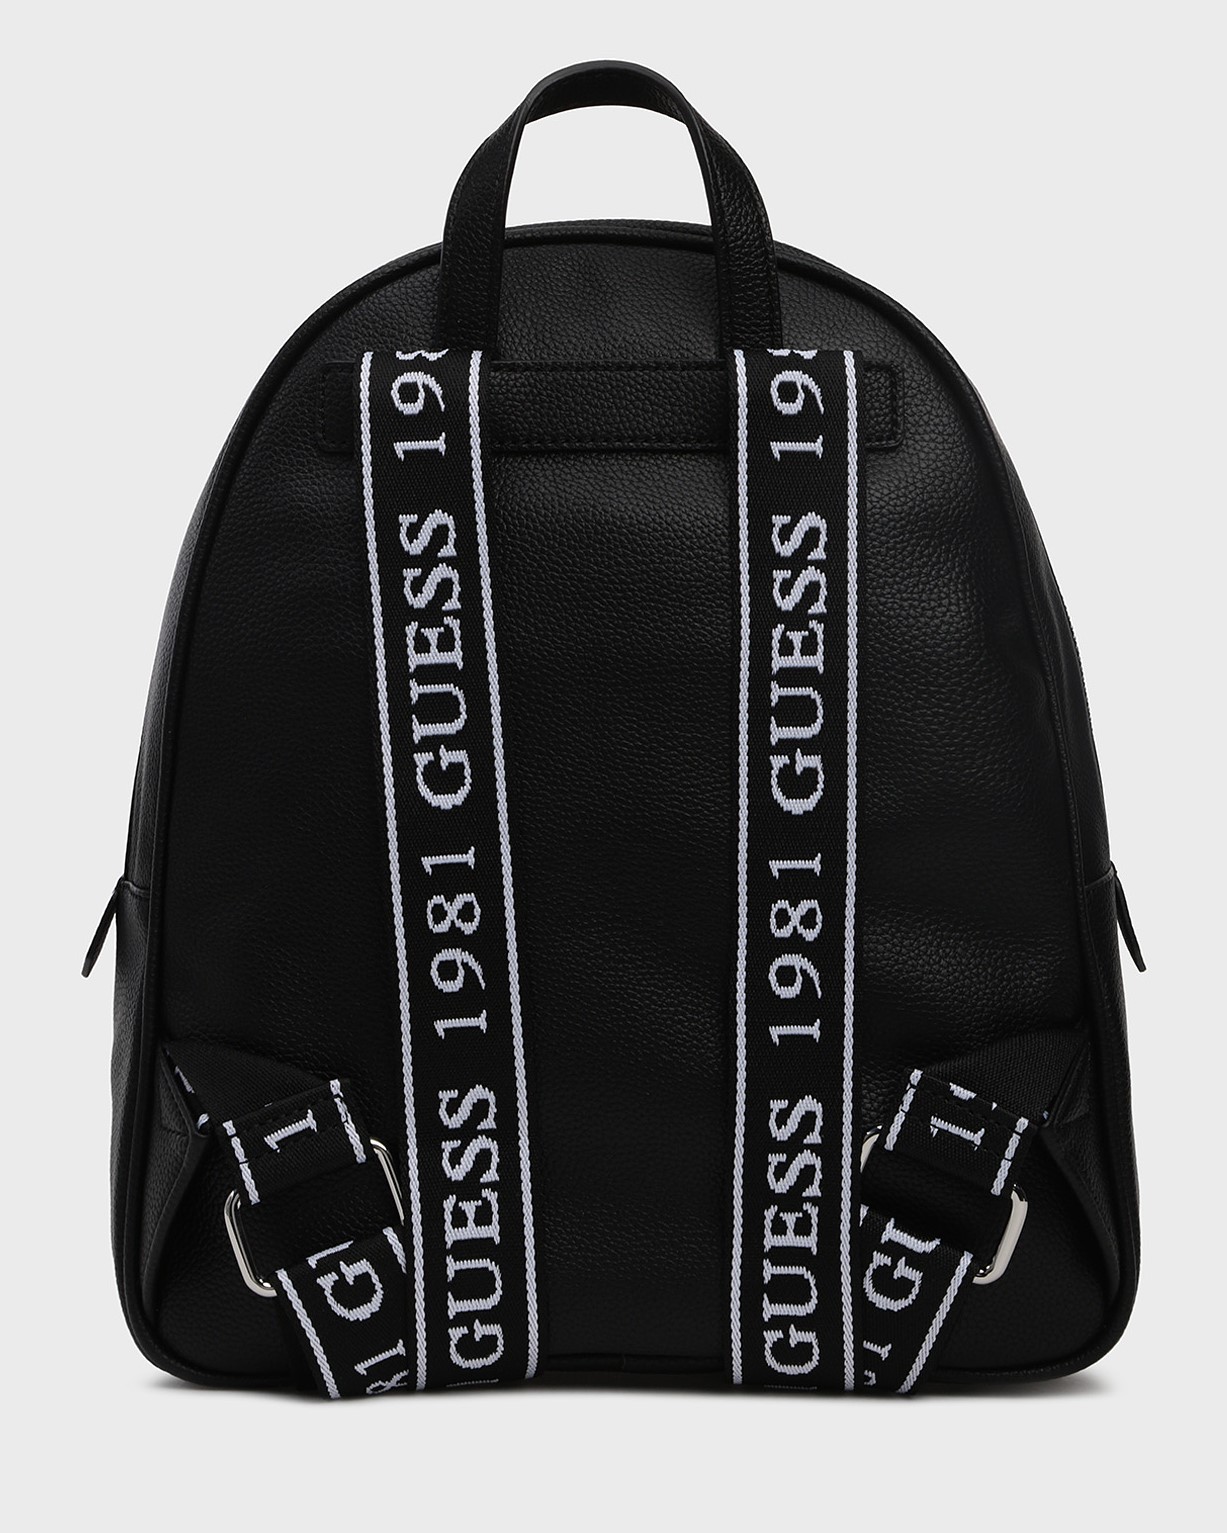 BALO GUESS BACKPACK 2